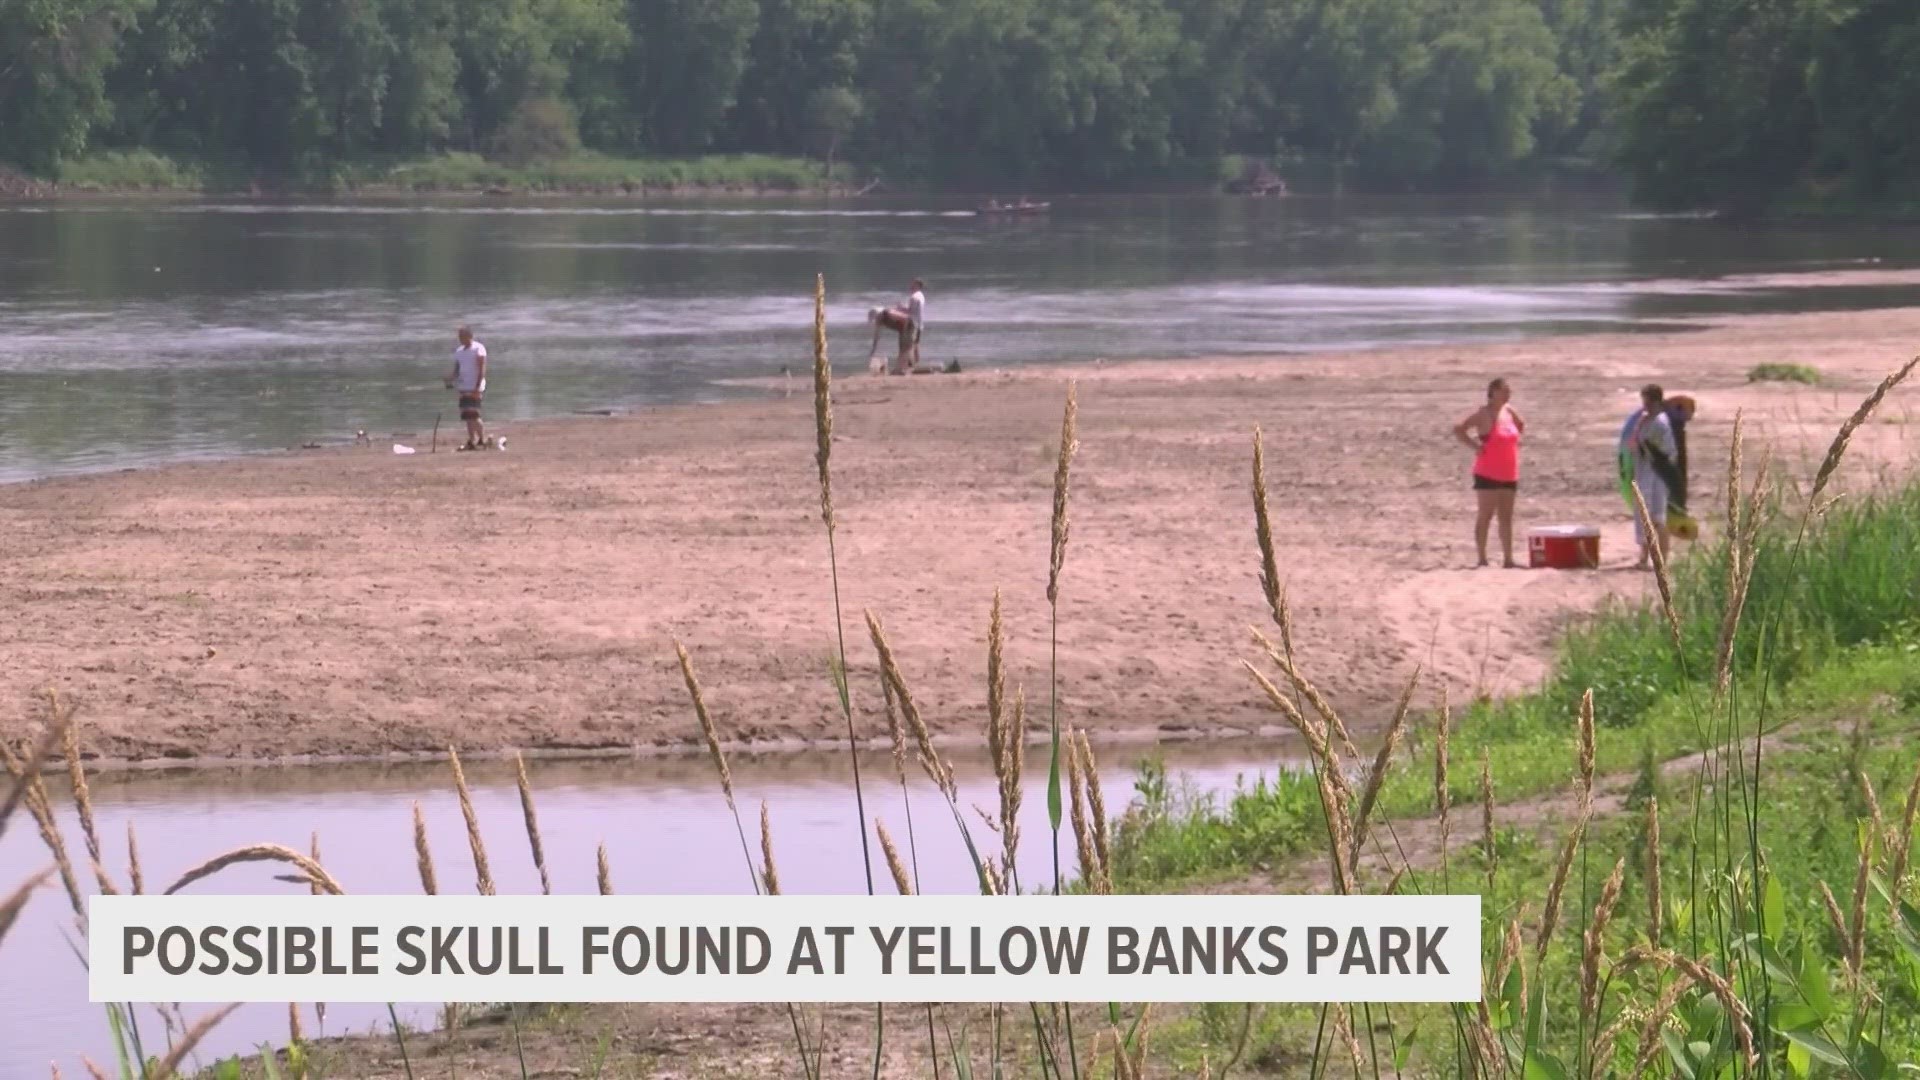 The Polk County Sheriff's Office said a possible human skull was discovered by campers at a sandbar in Yellow Banks Park on Friday, June 16.